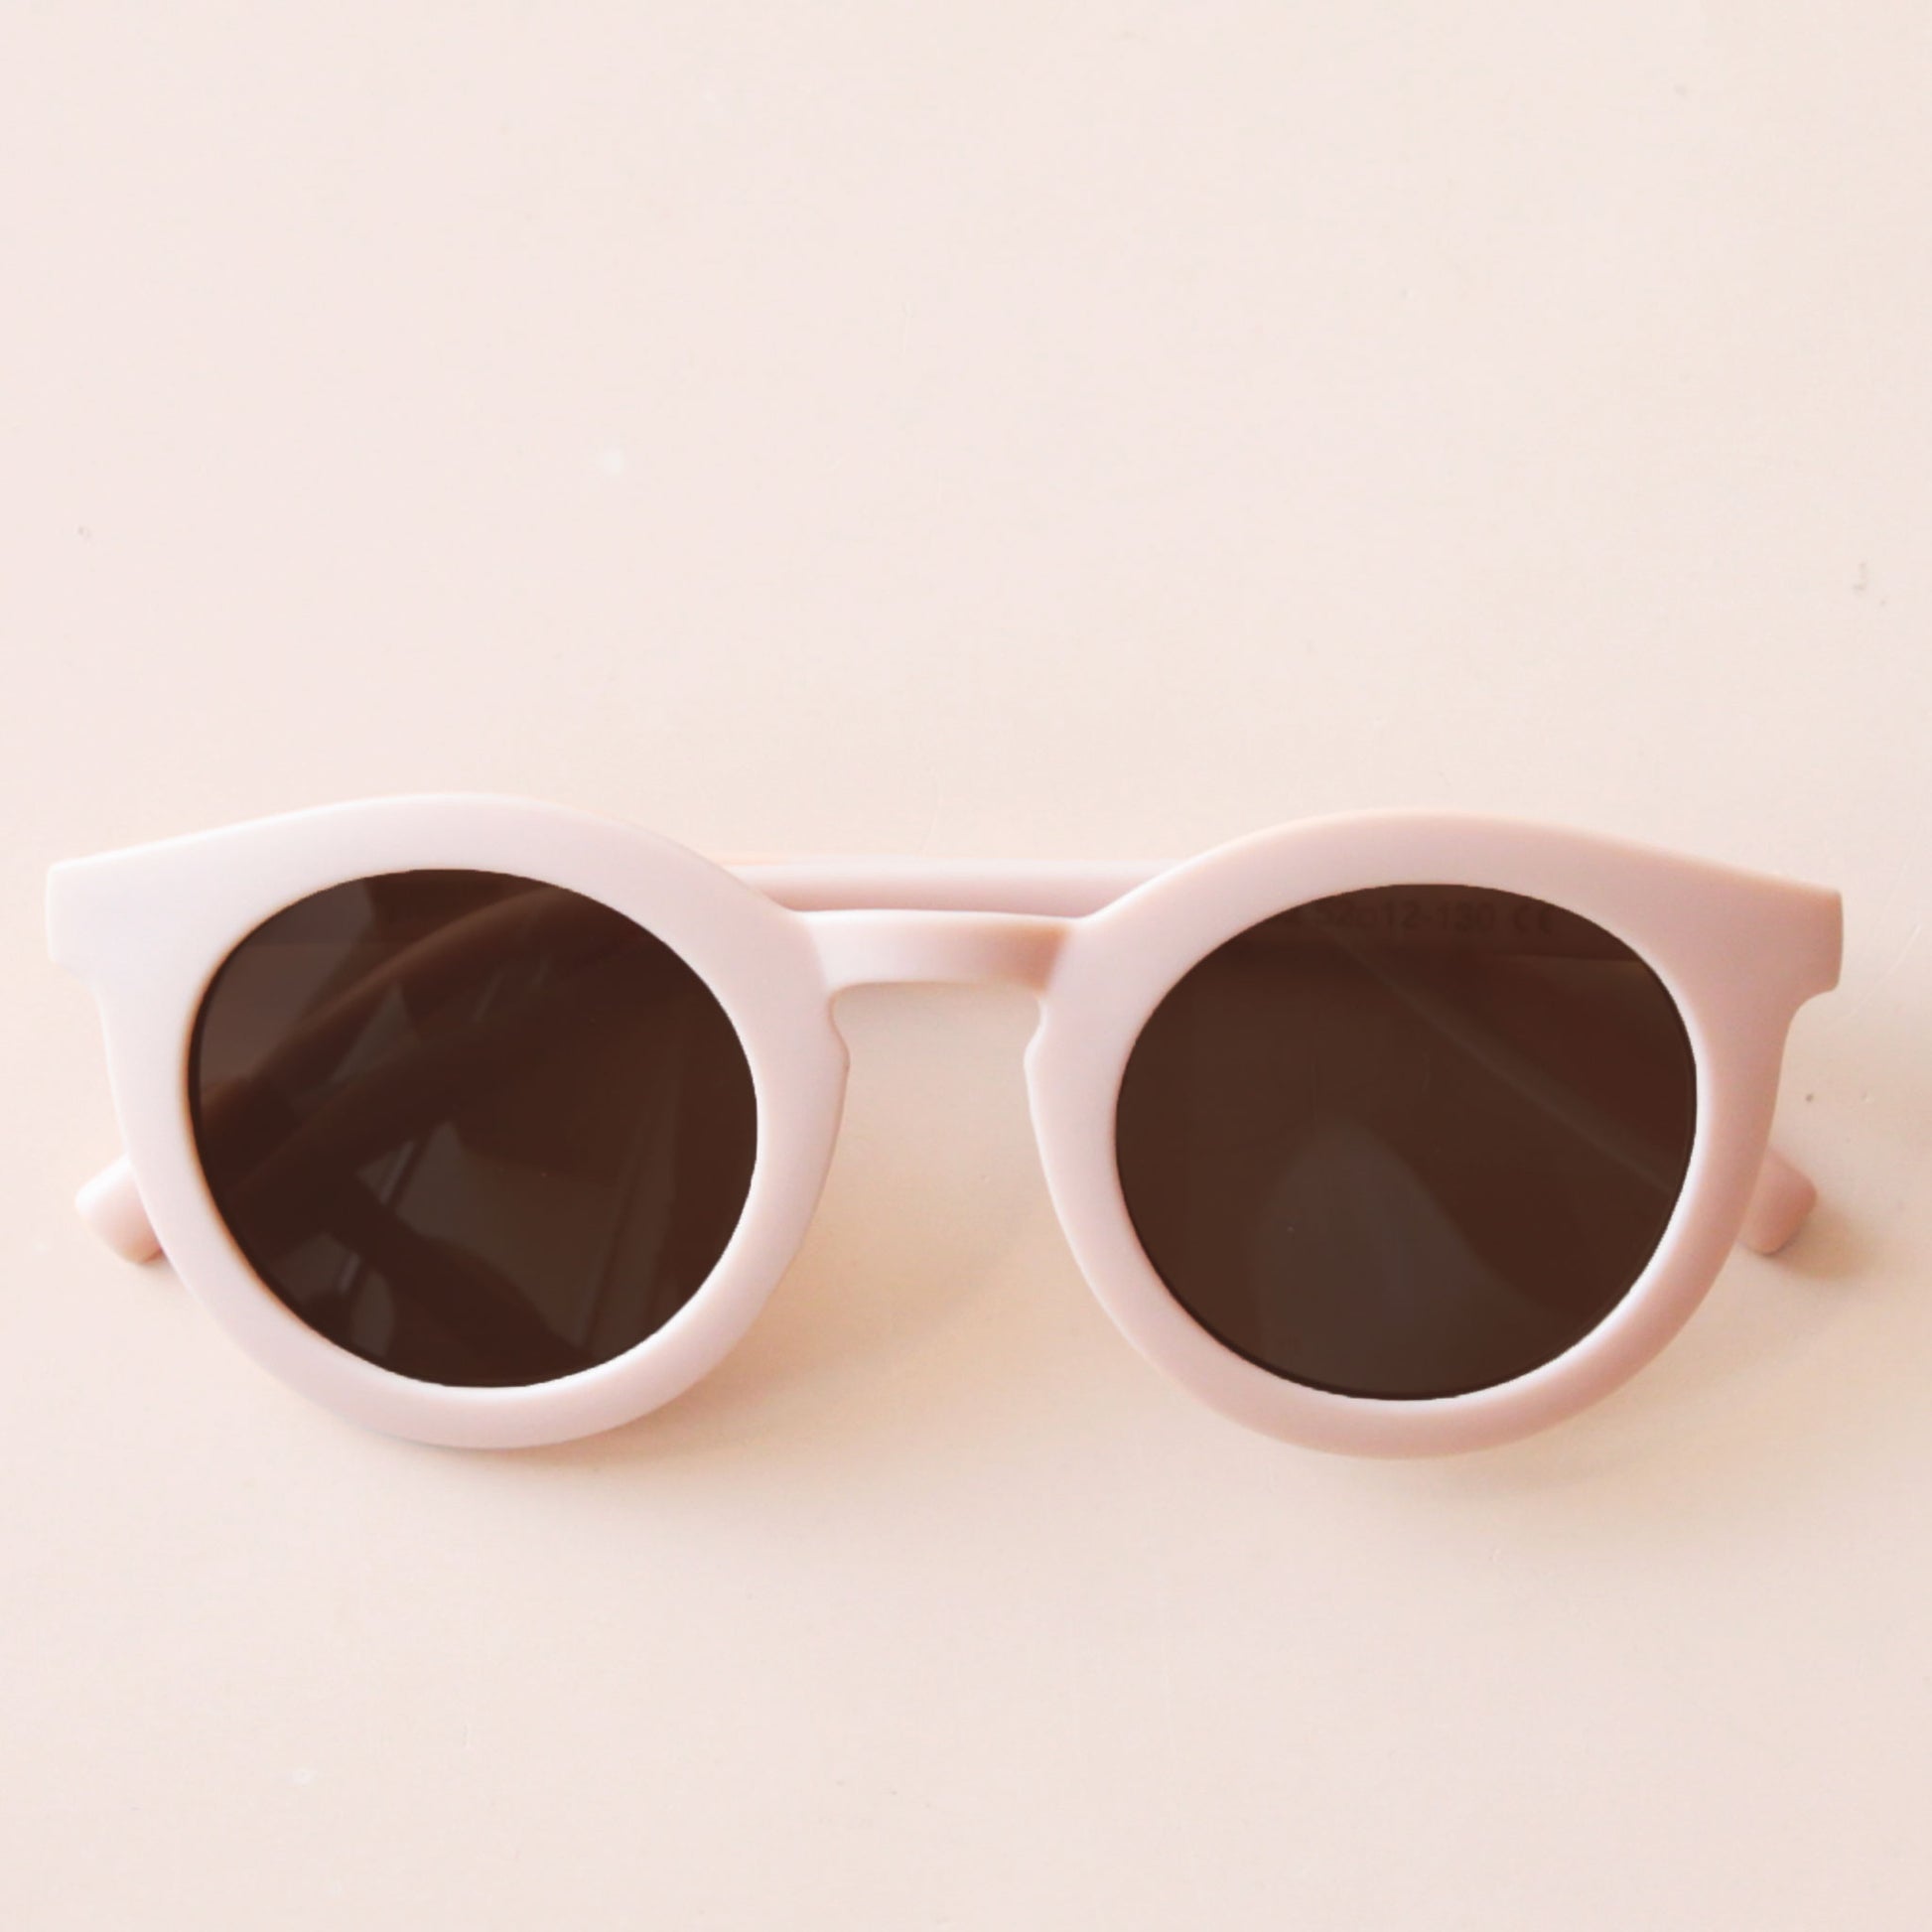 On a neutral background is a light pink children's sunglass with a round shape.